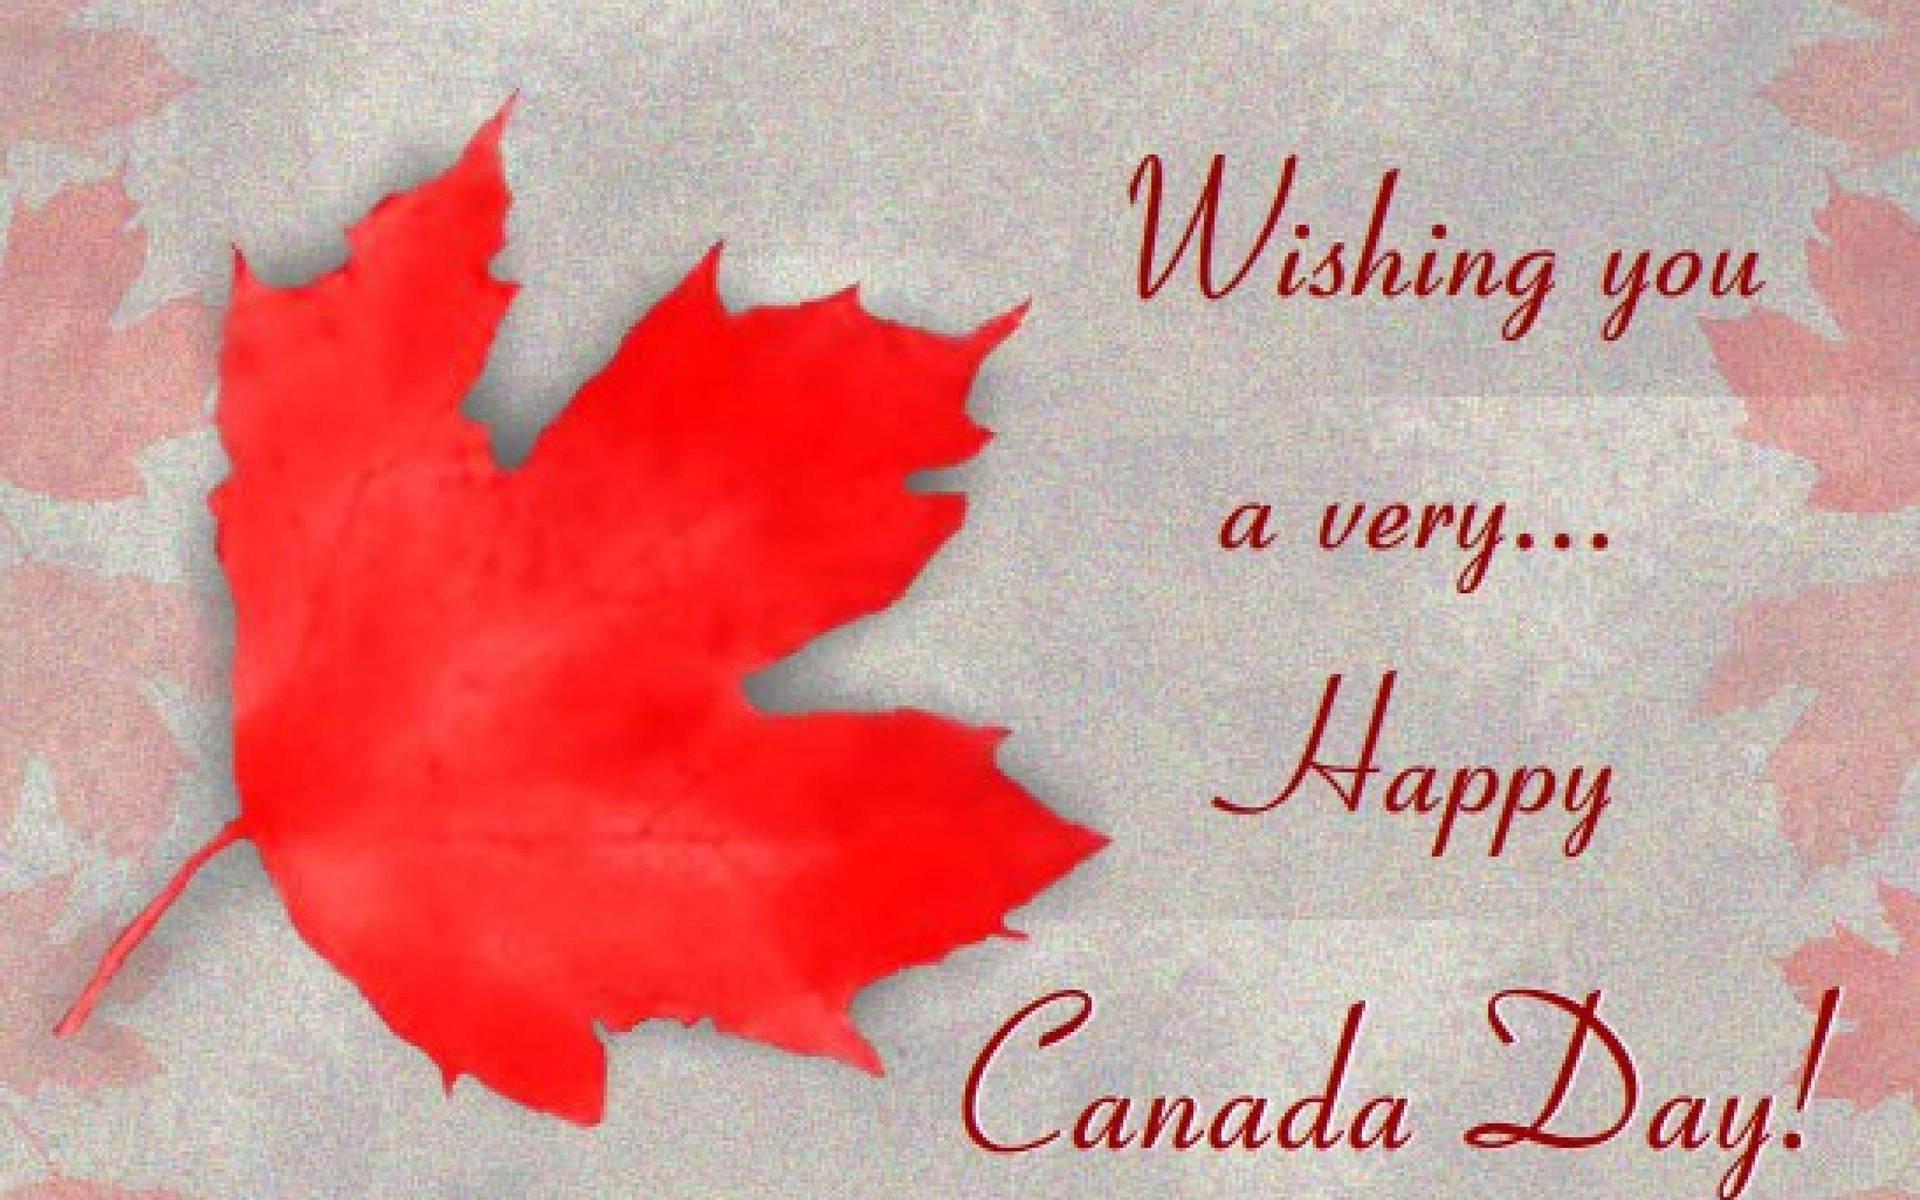 Canada Day Image Wallpaper